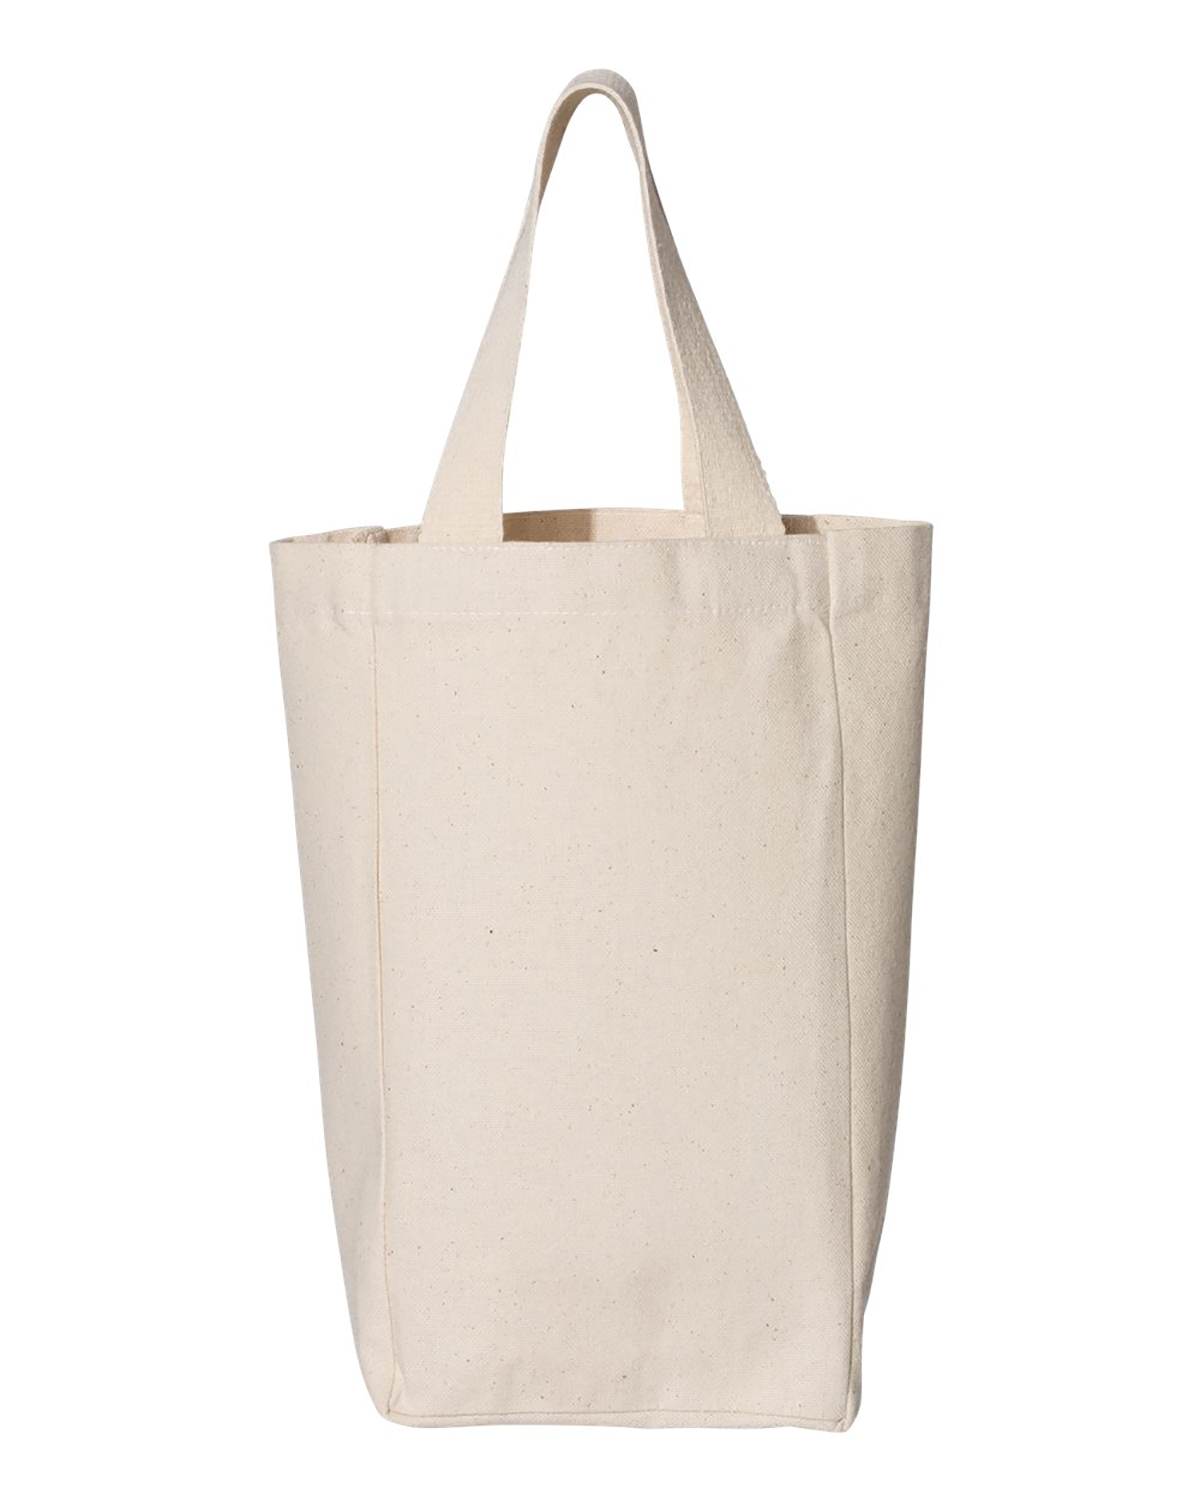 'OAD OAD110 Cotton Canvas Large Laundry Bag'